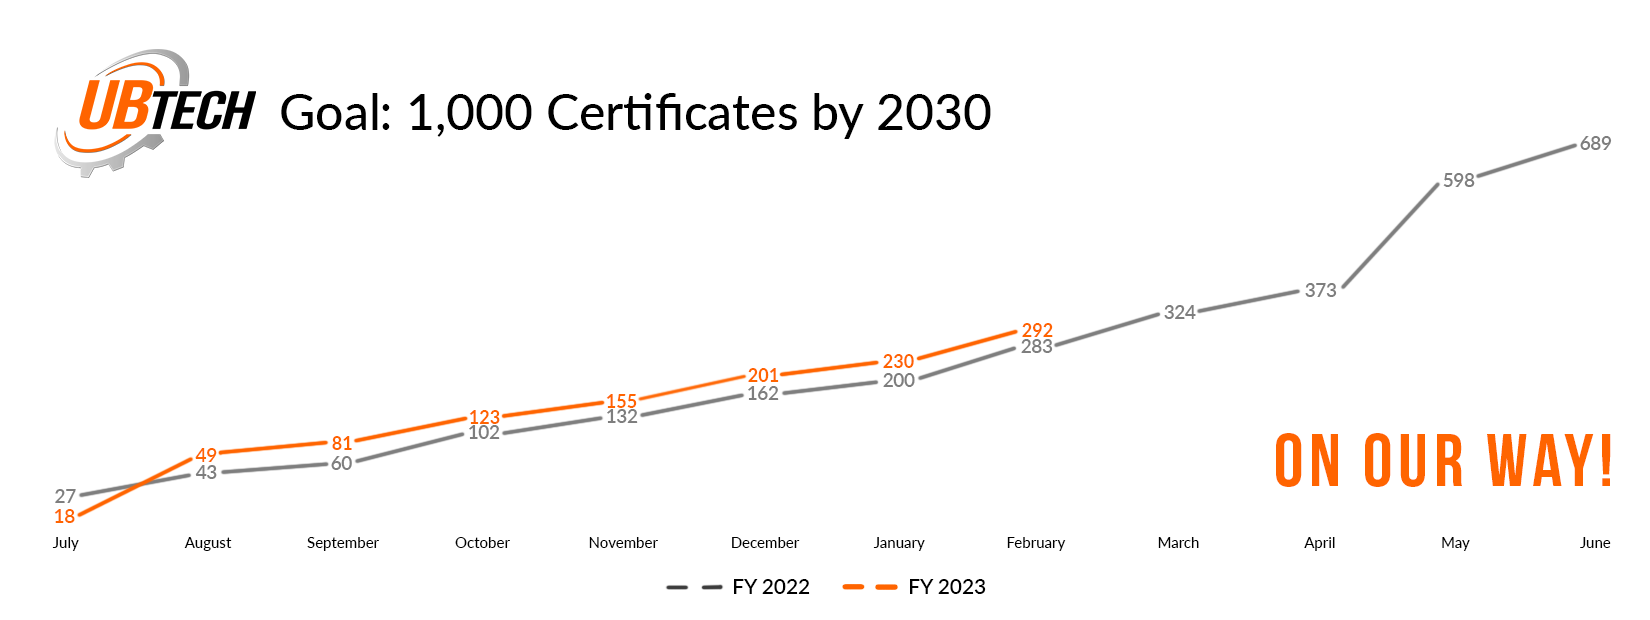 On our way to 1,000 certificates by 2030. December's certificate count was 201 for FY 2023, compared to 162 in December FY 2022